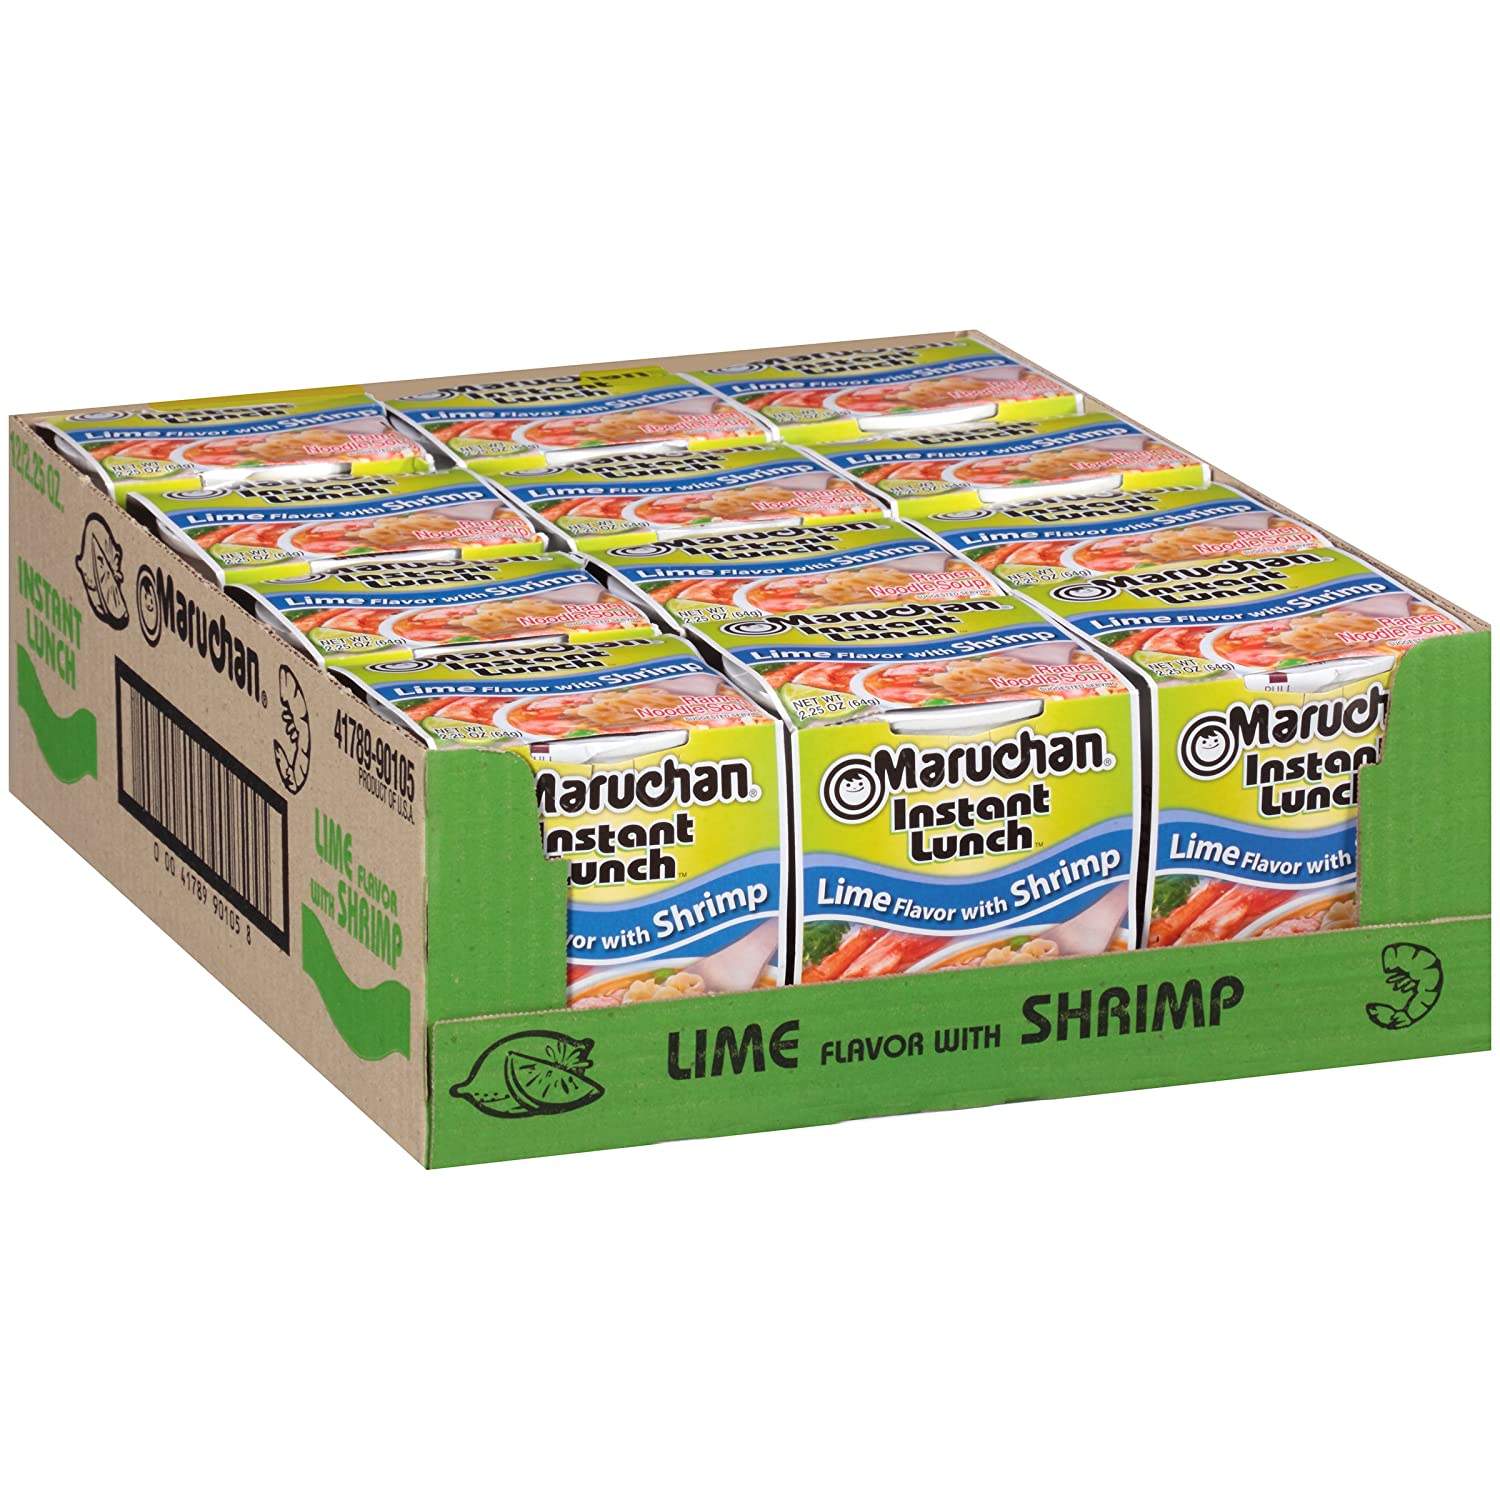 12-Pack 2.25-Oz Maruchan Instant Lunch Ramen Noodles (Lime w/ Shrimp) $4.44 + Free Shipping w/ Prime or on orders over $35